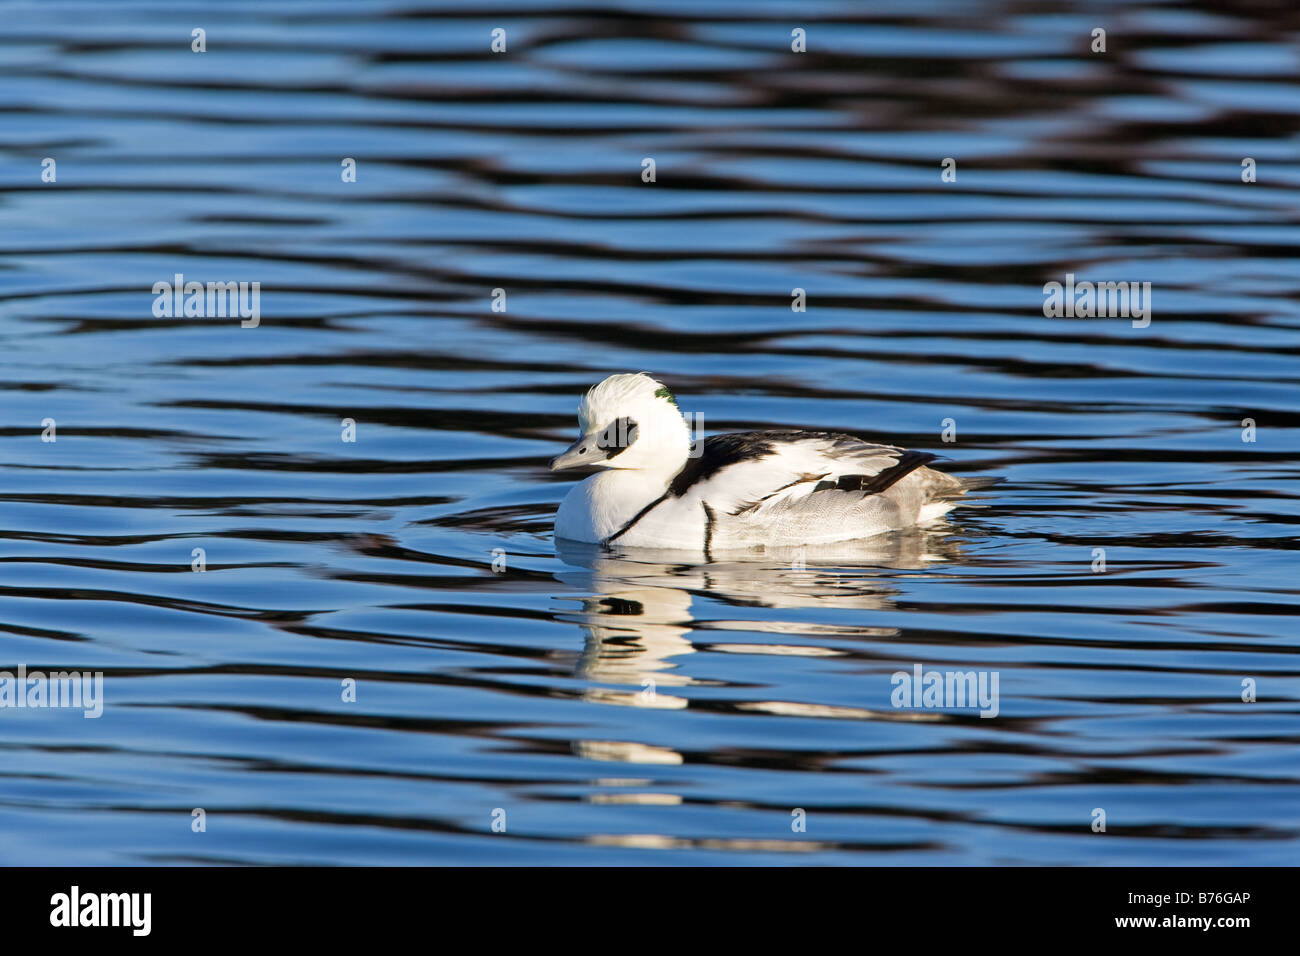 Smew Mergus albellus adult male swimming in blue water with reflections Stock Photo